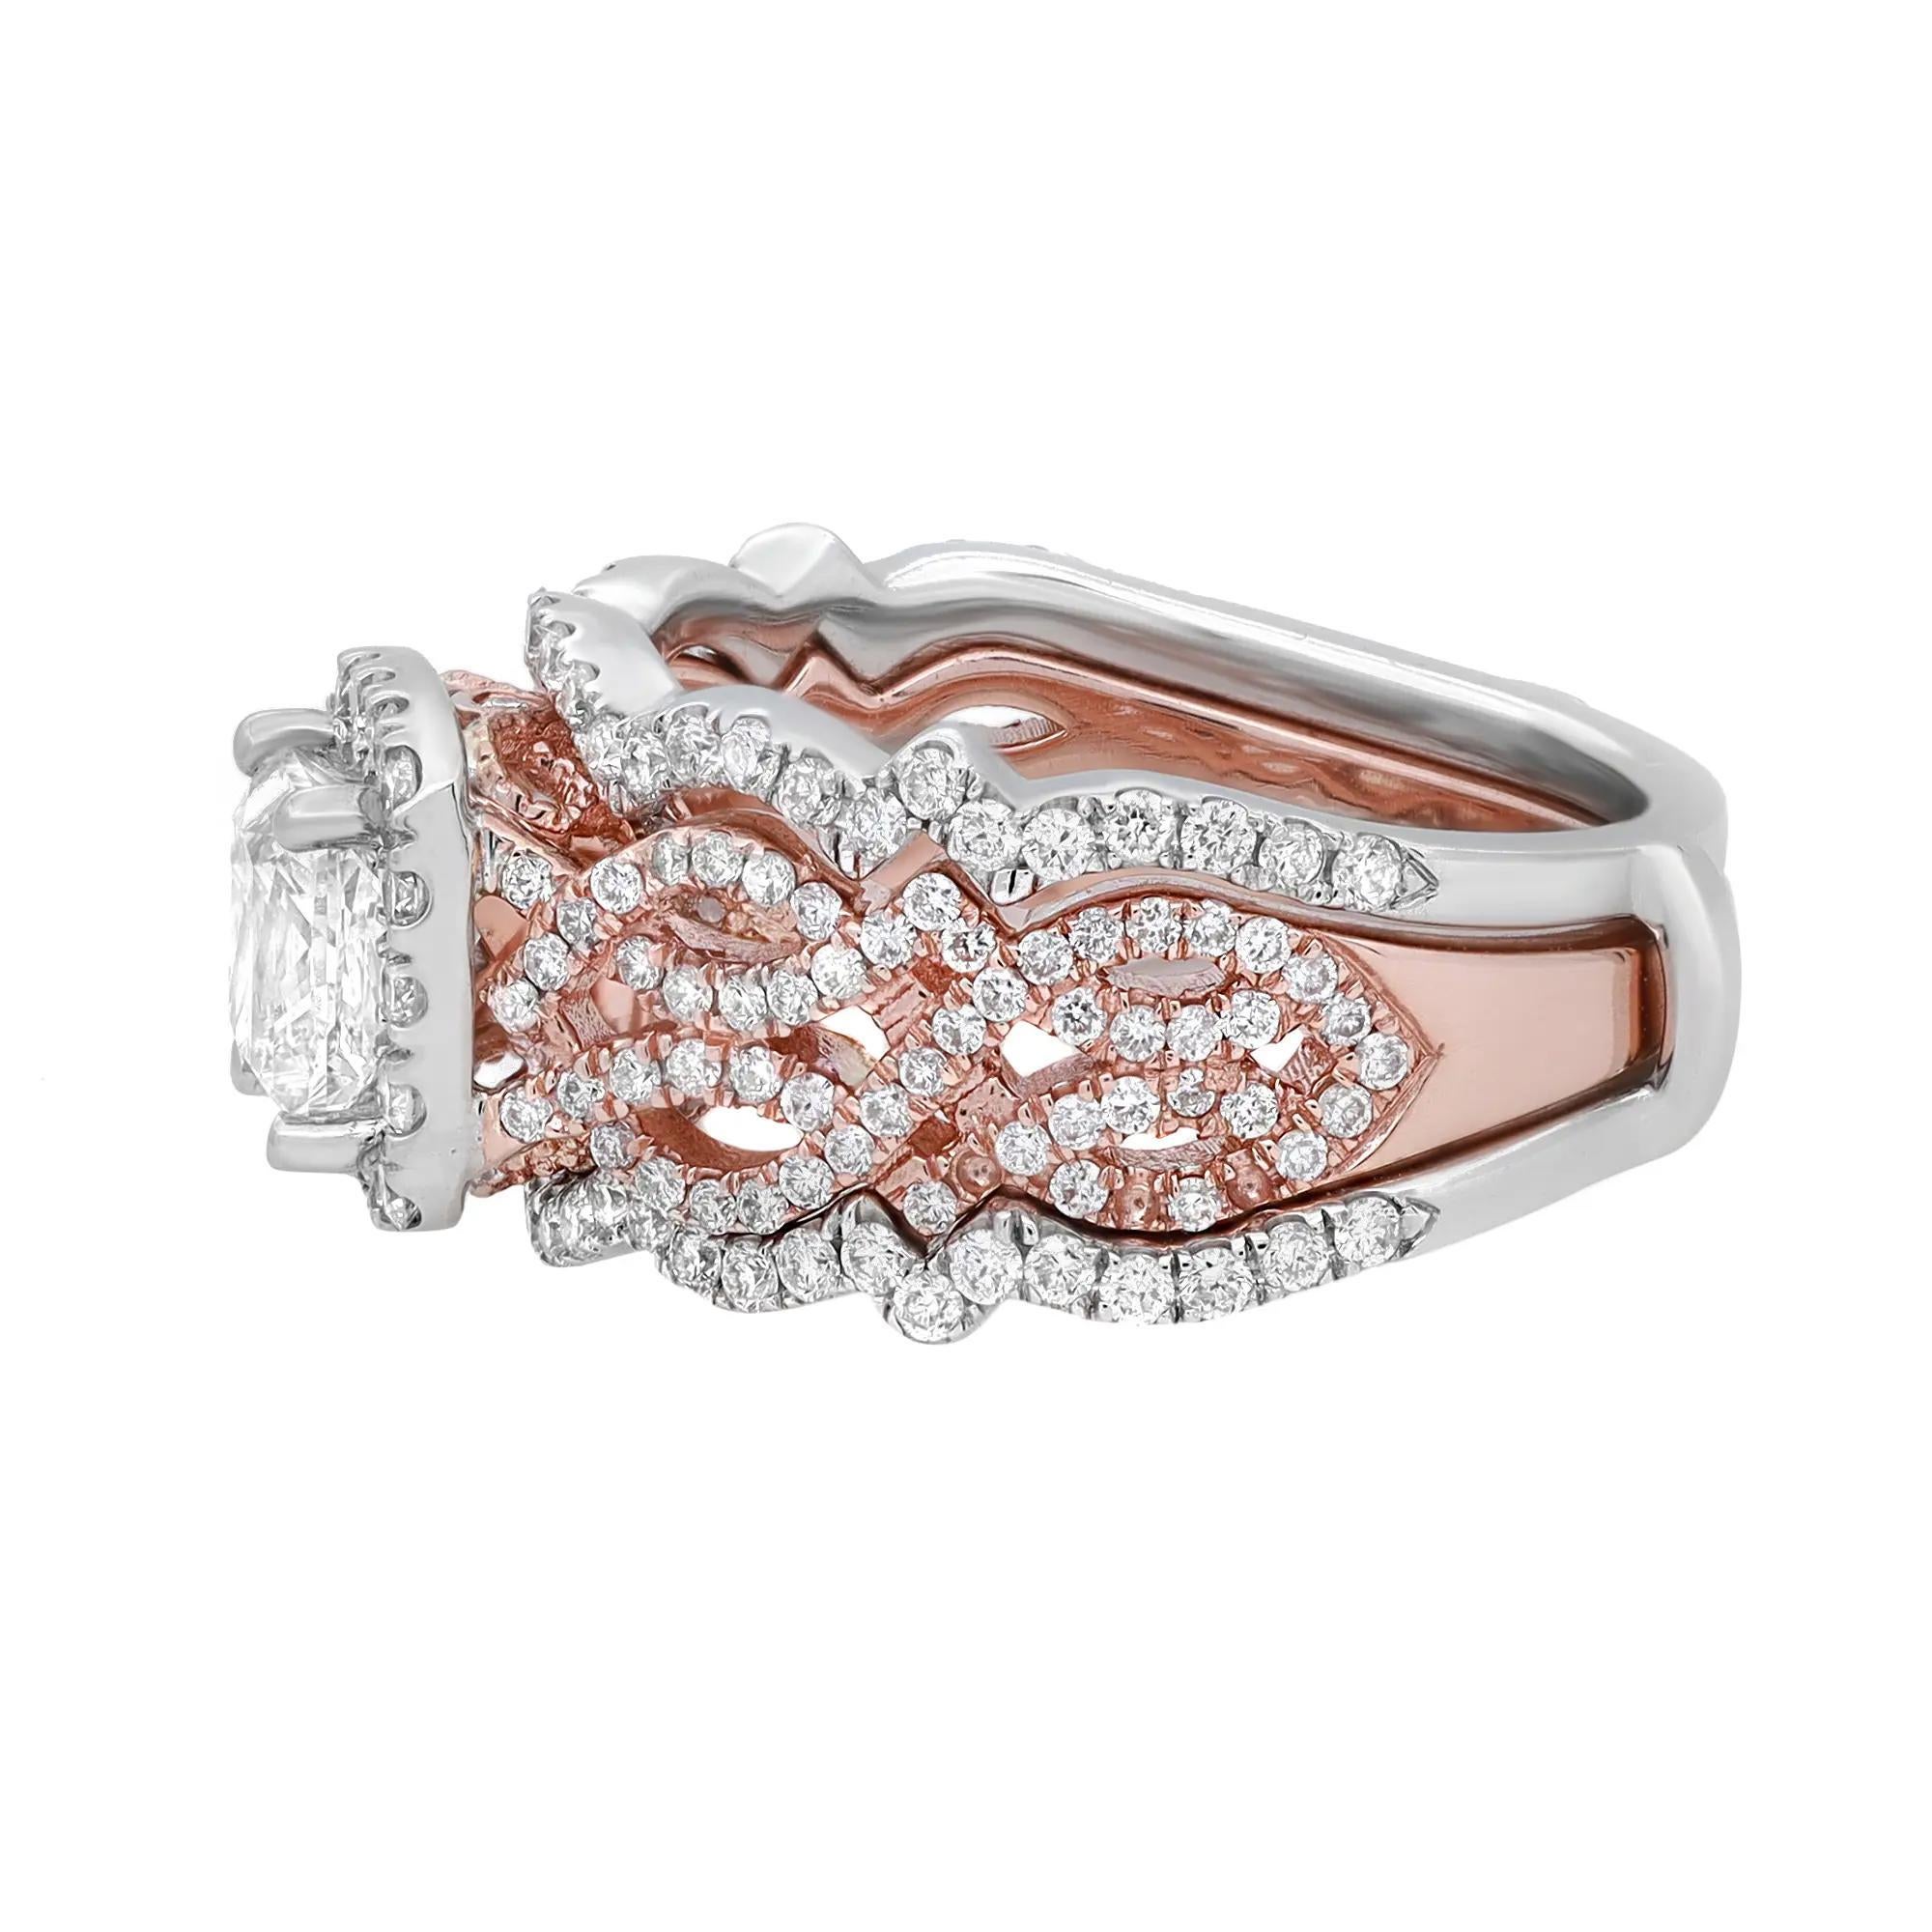 This enchanting engagement ring is adorned with a sparkling GSI certified square modified brilliant diamond in the center weighing 1.00 carat, secured firmly in a beautiful four prong setting and a classic wide pave set diamond rose gold band. This